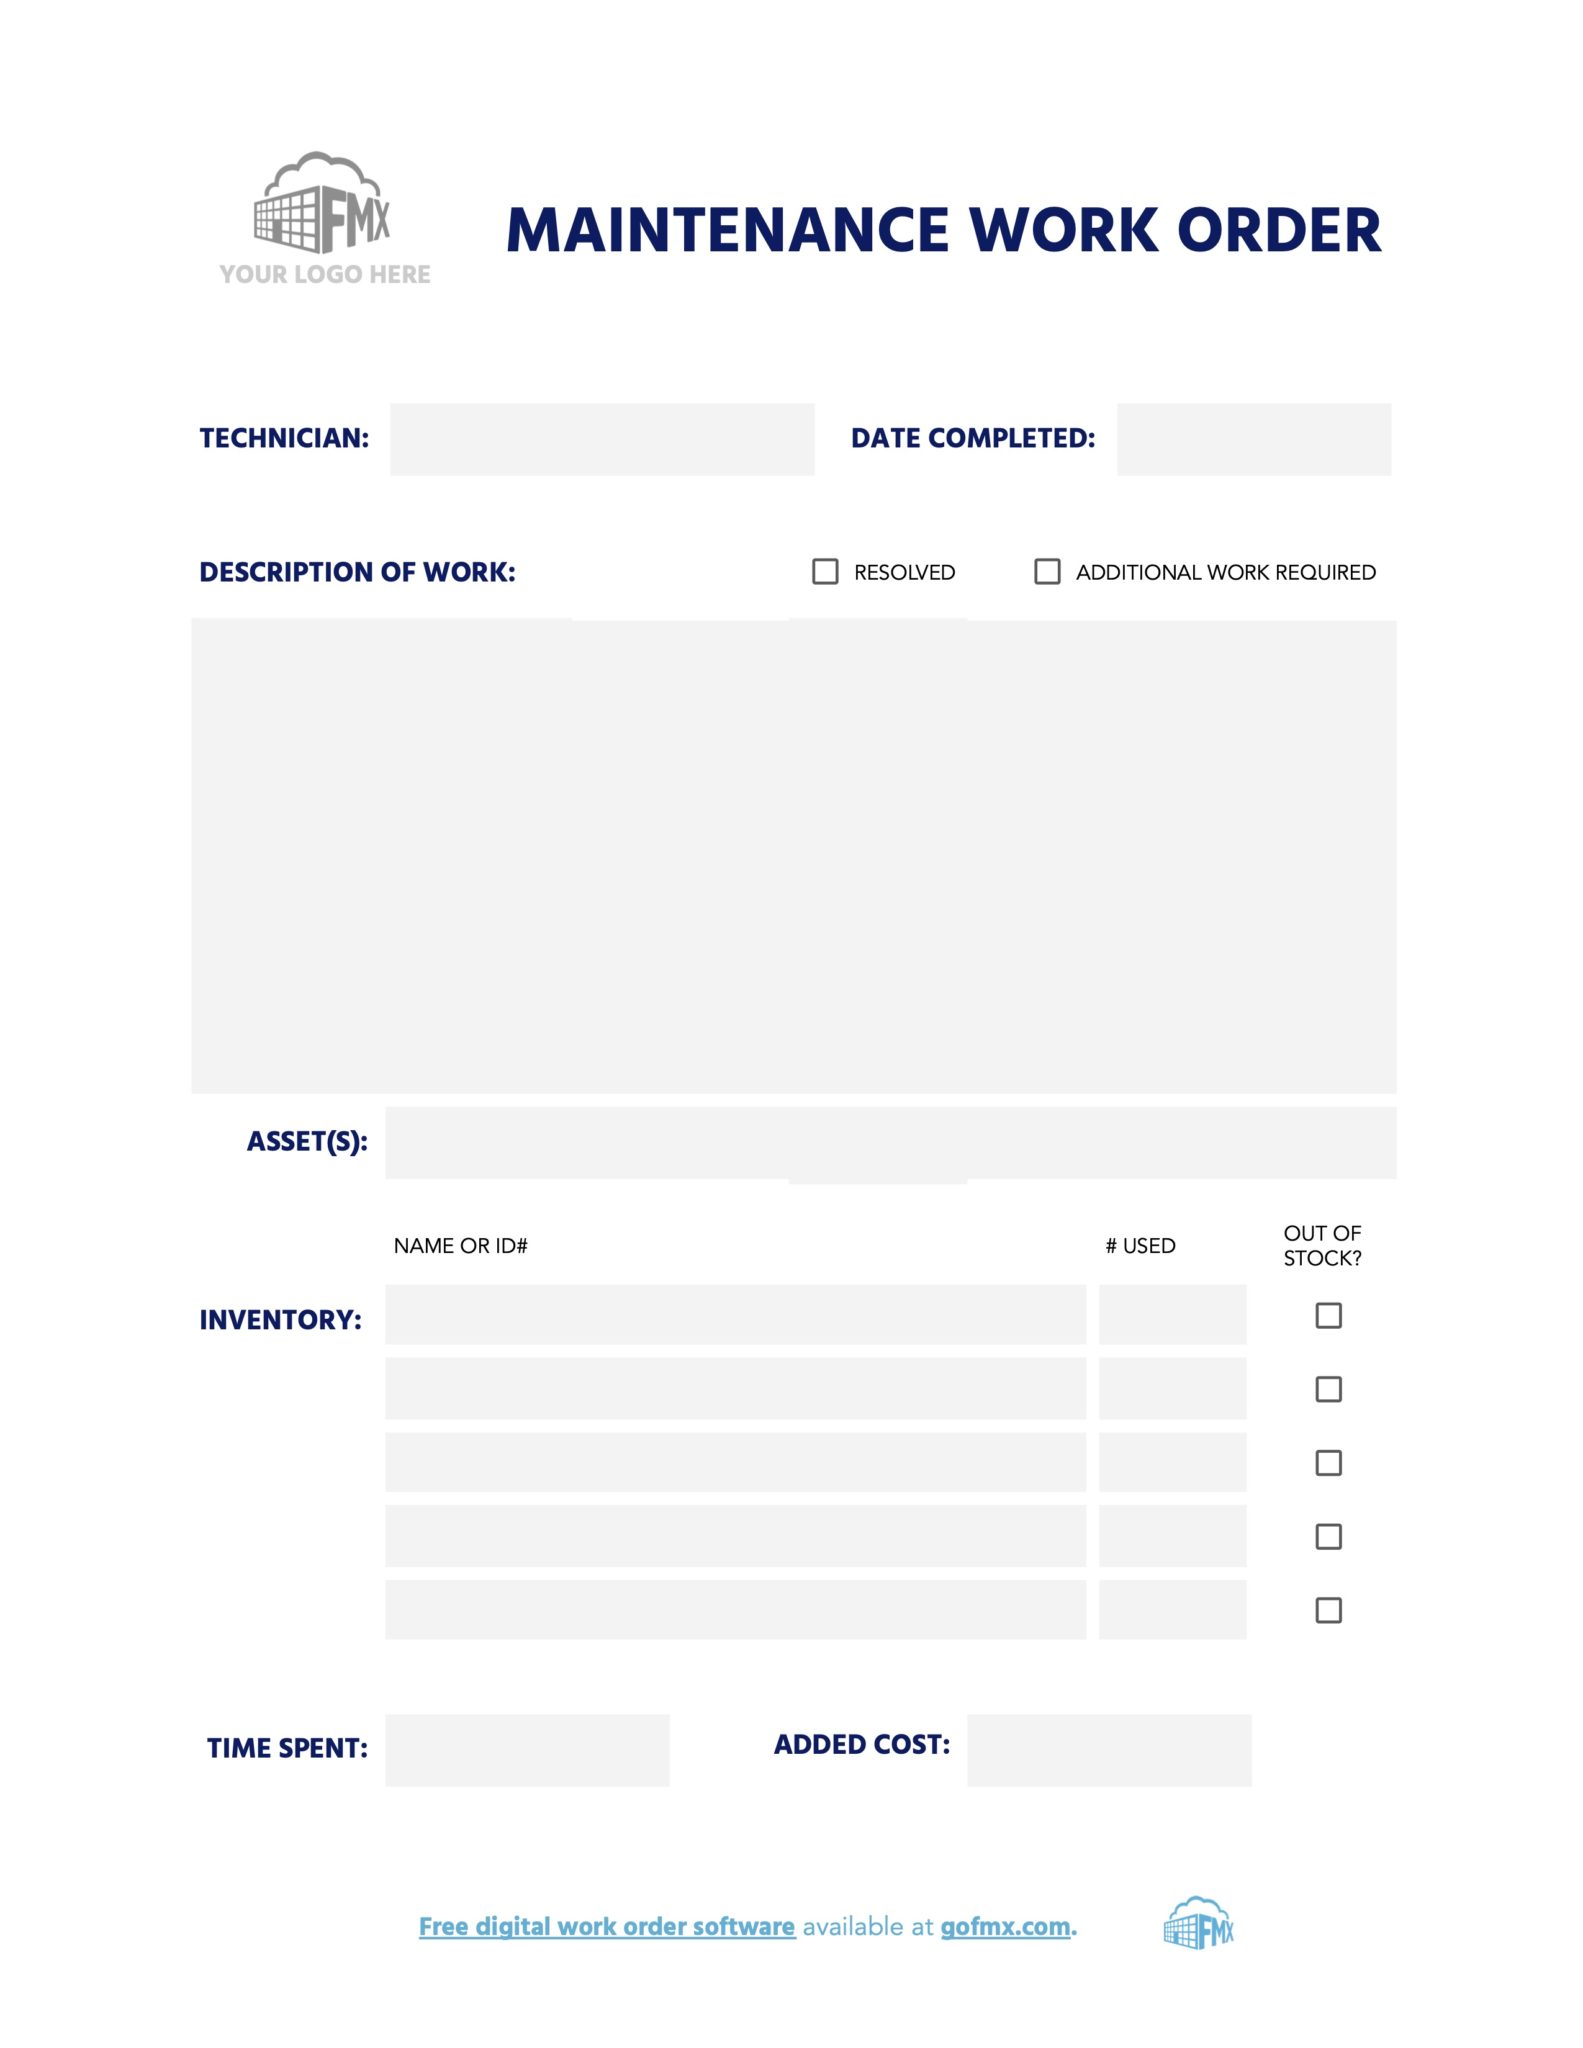 Maintenance Work Order Form [Free Downloadable Template] FMX